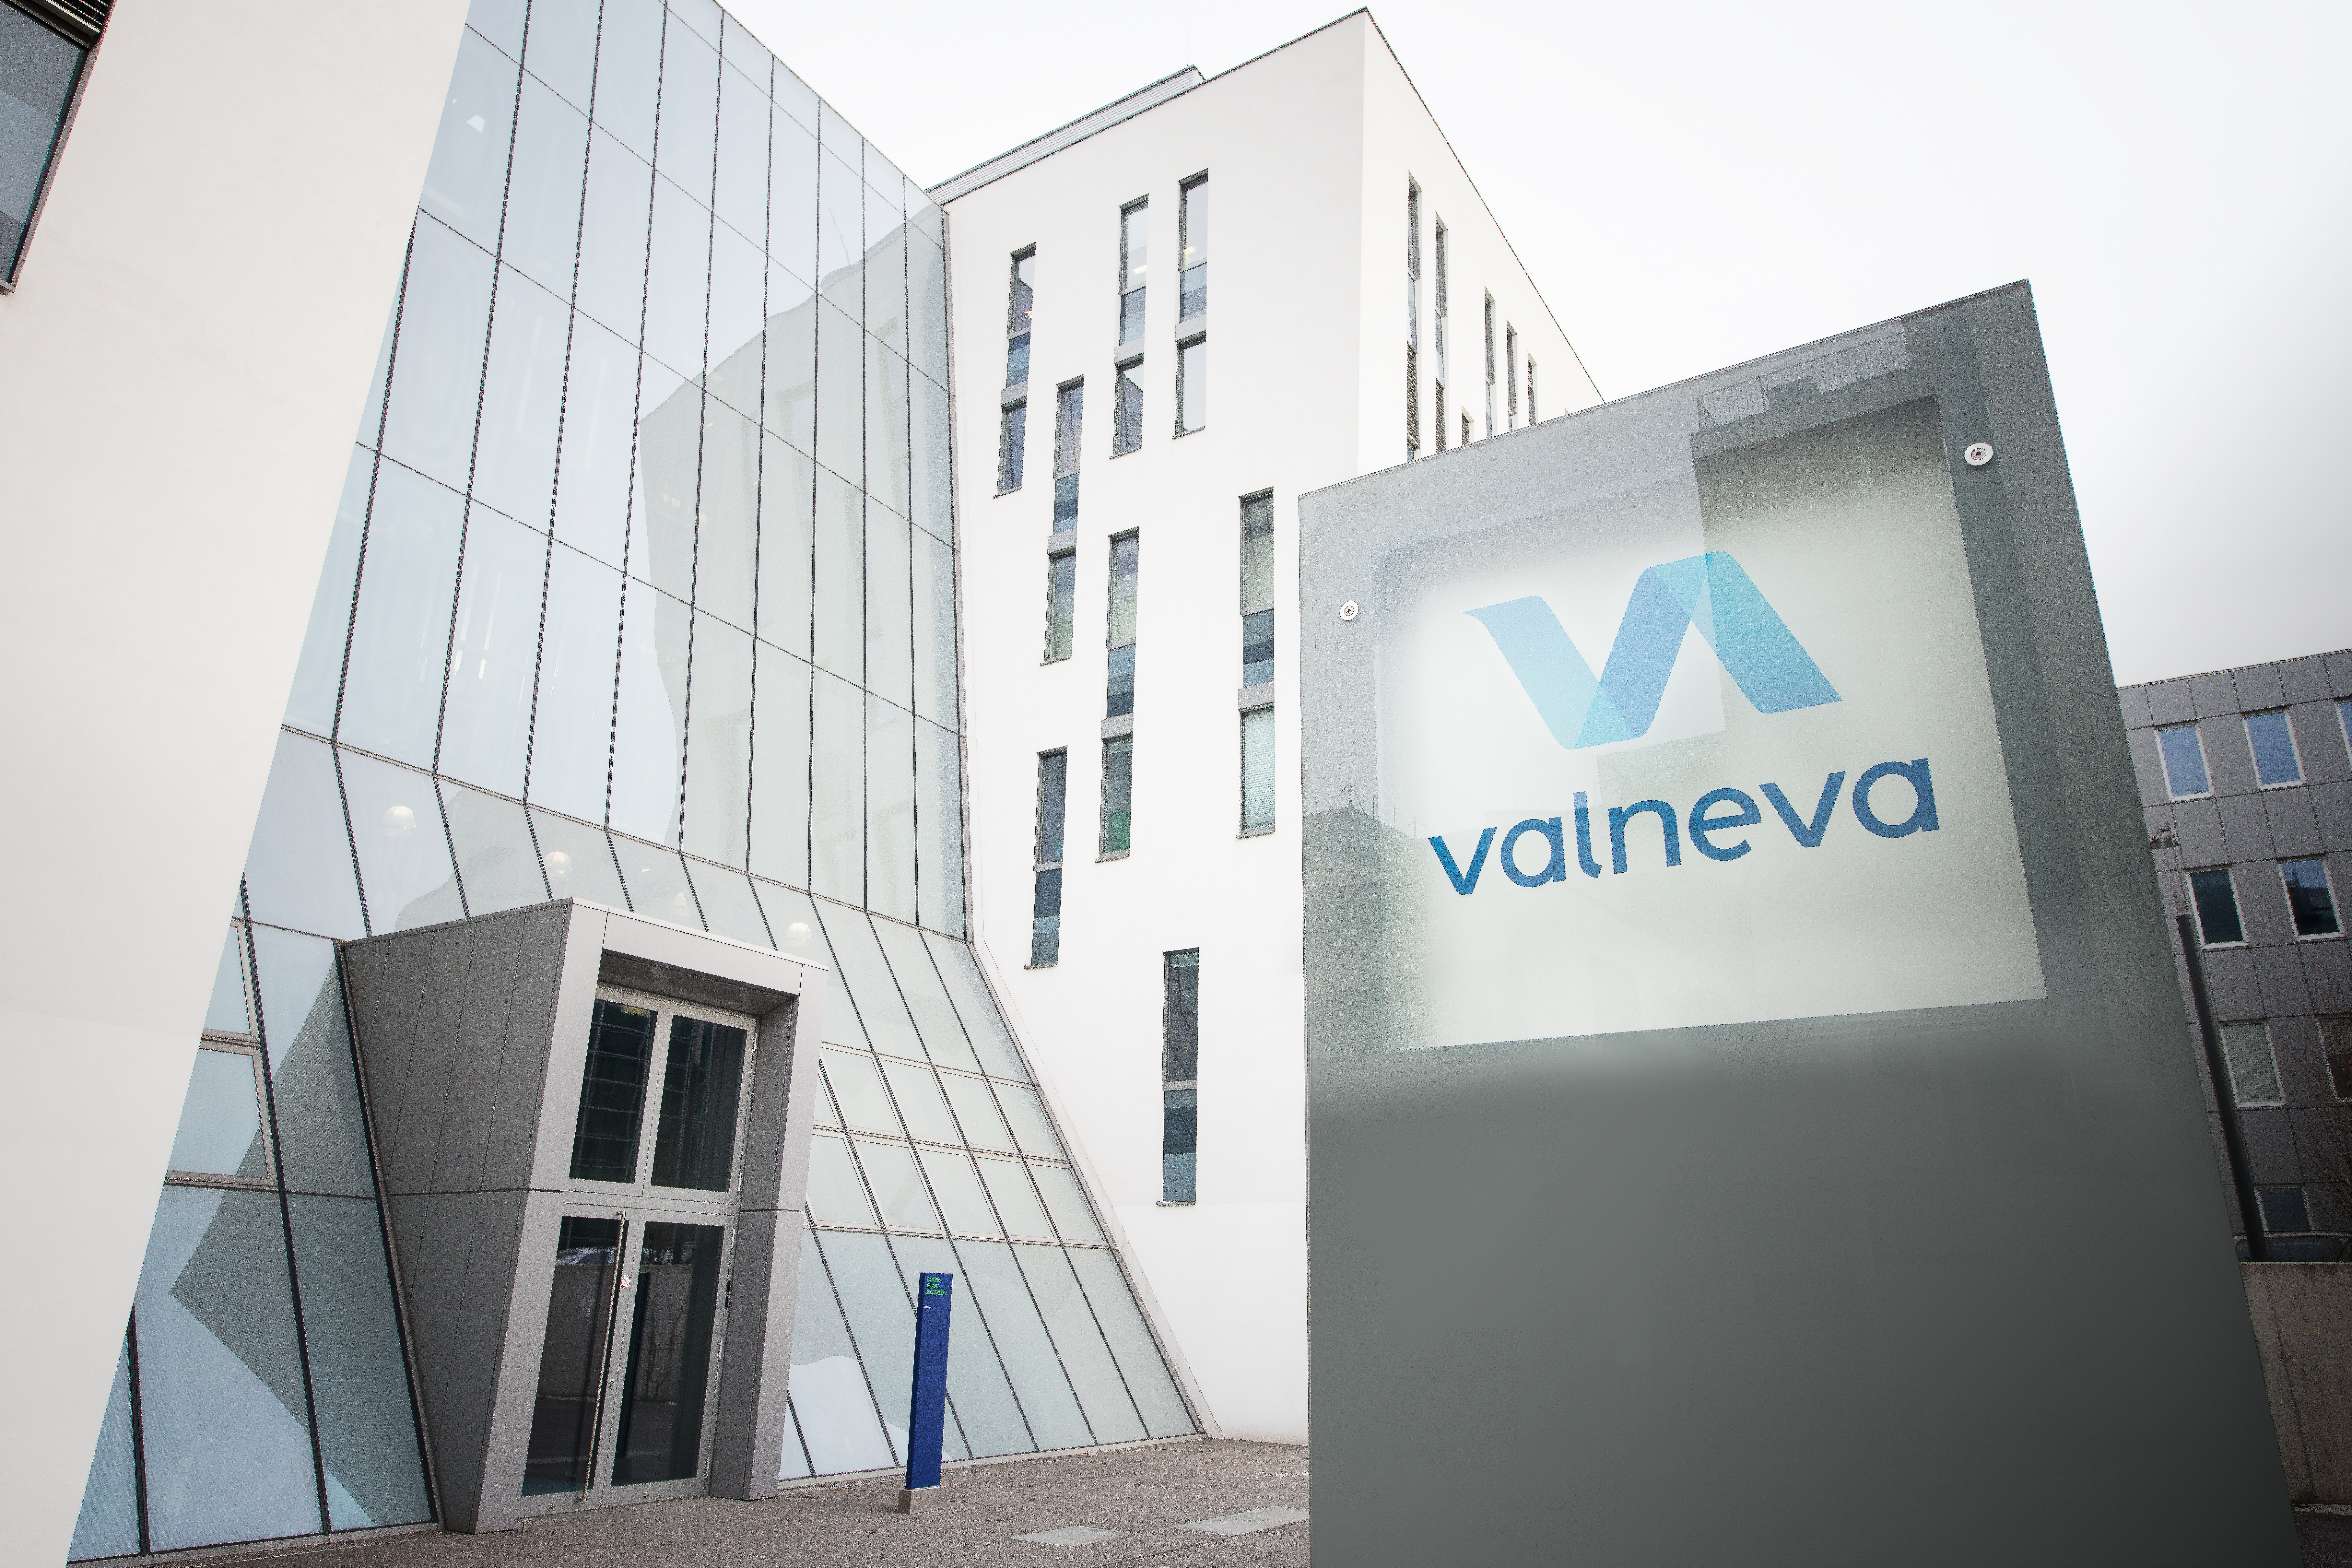 Weak data as booster for Comirnaty close off opportunity for Valneva's COVID-19 vaccine